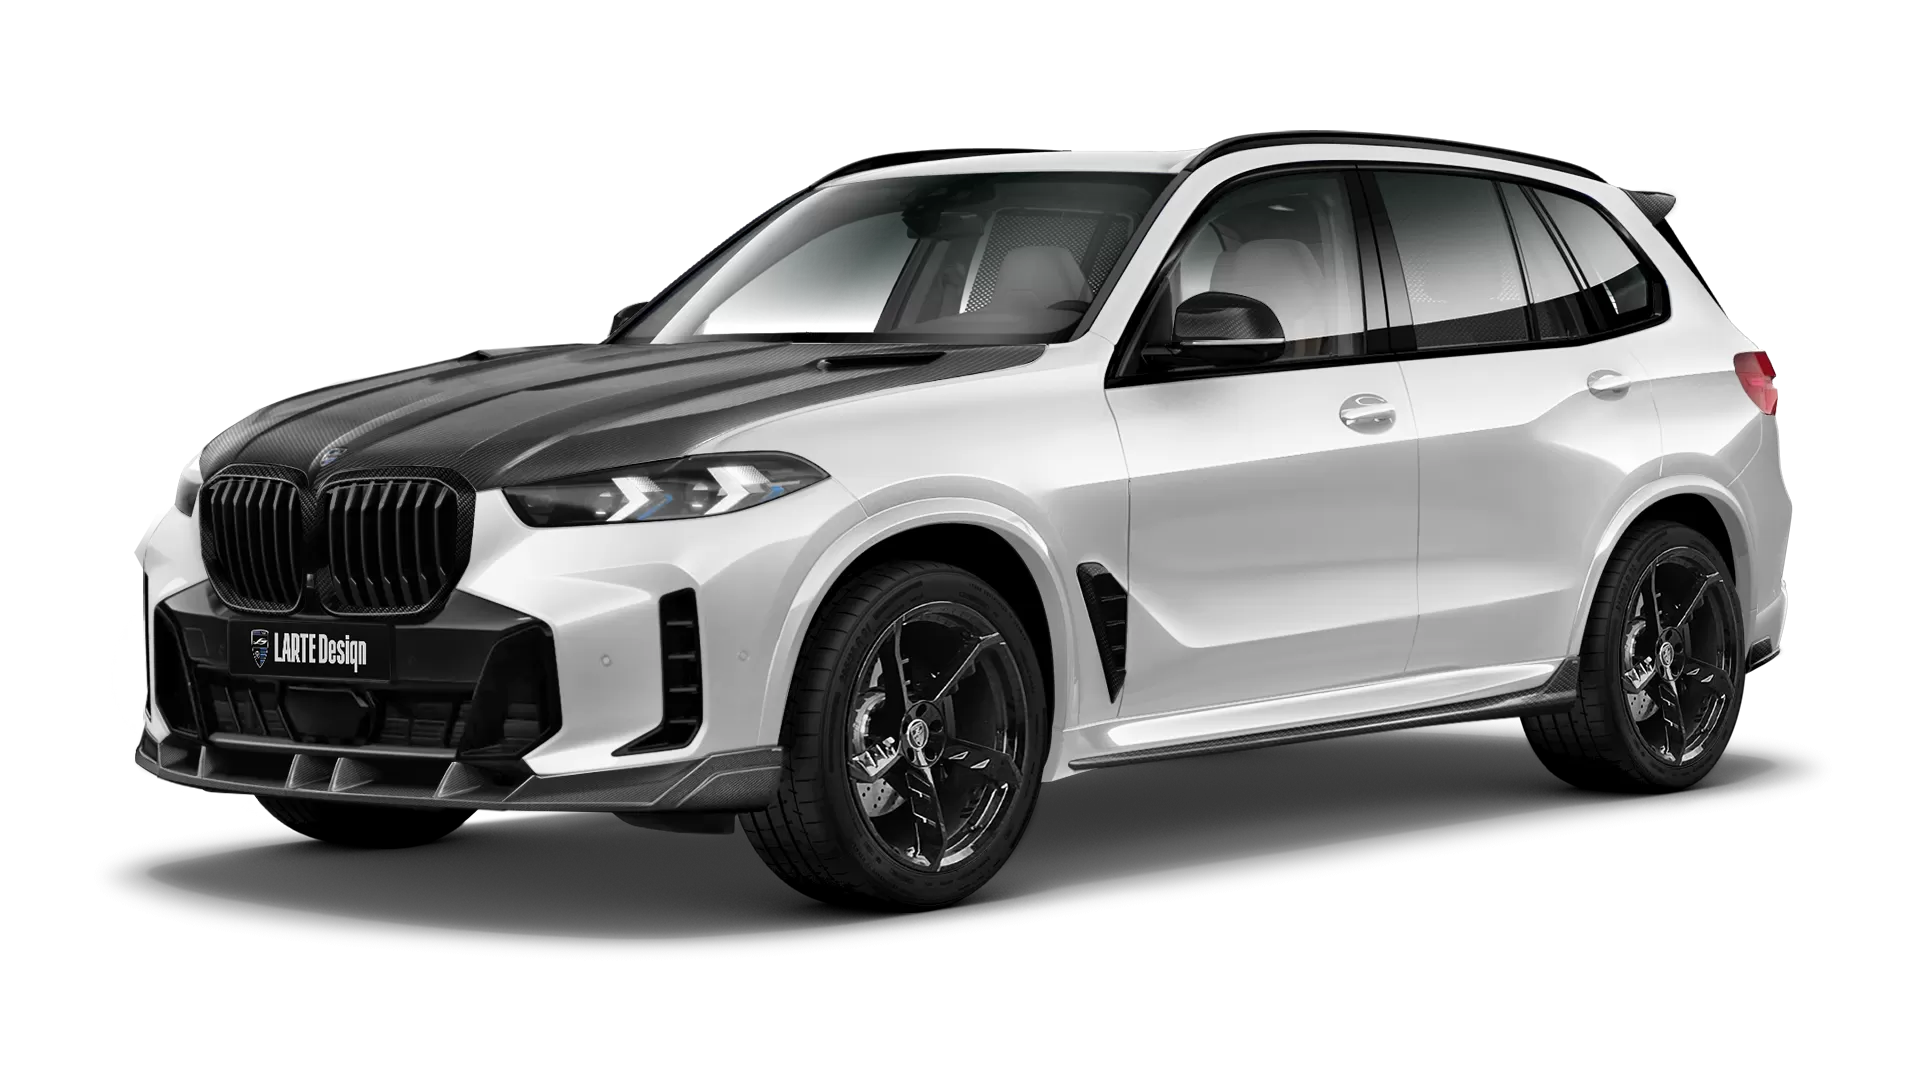 BMW X5 G05 LCI Facelift with carbon body kit: front view shown in Mineral White